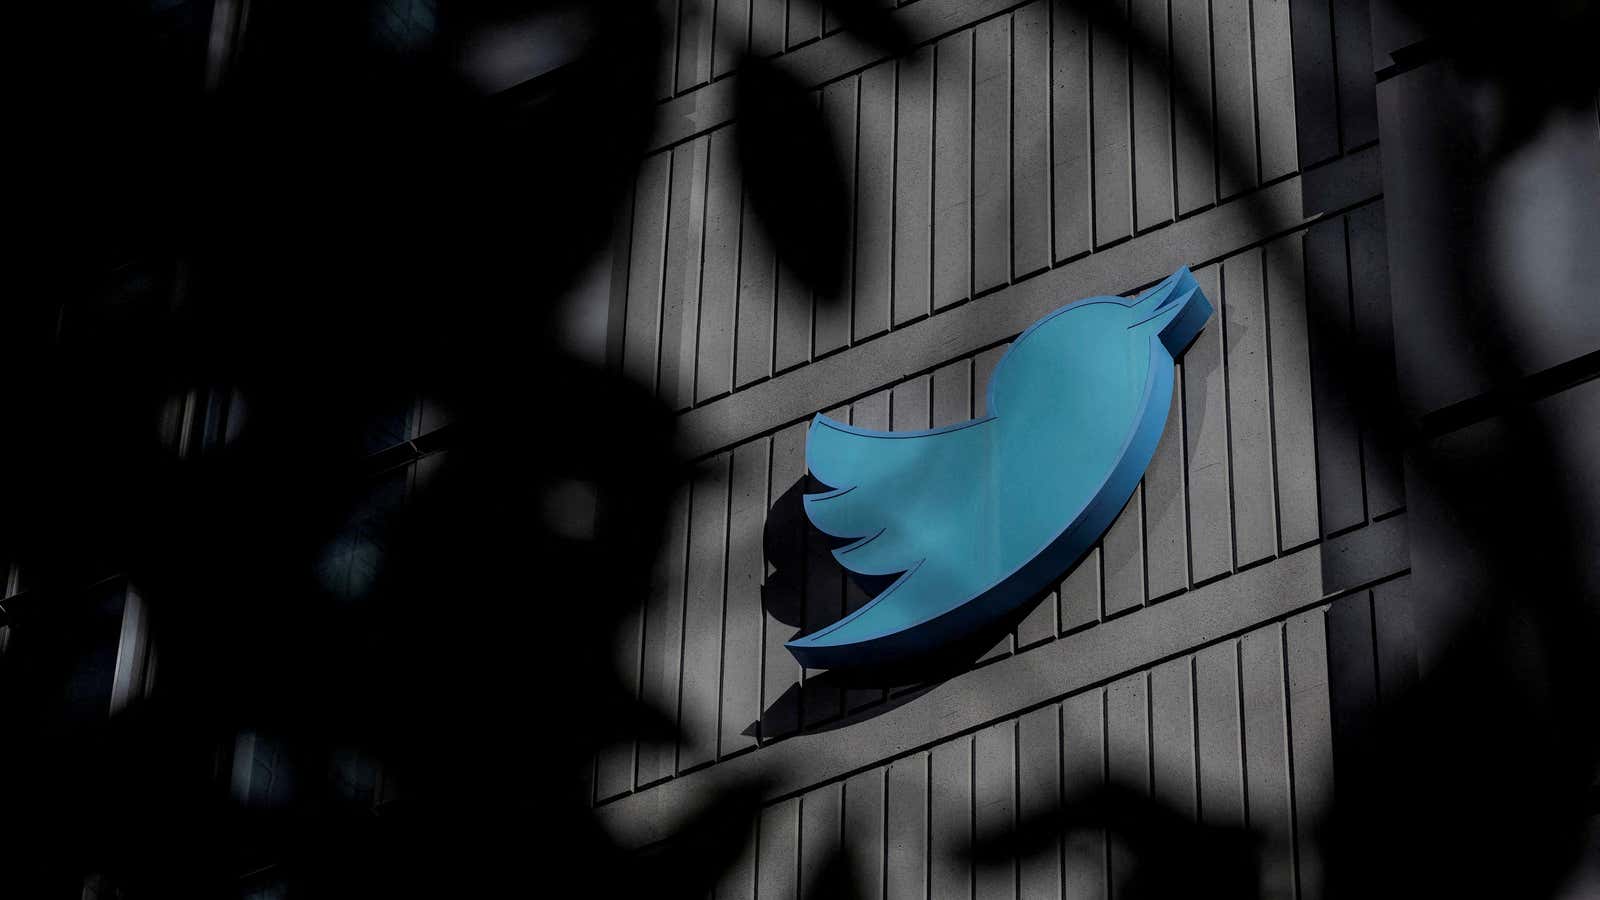 Twitter has withdrawn from an EU deal to combat disinformation